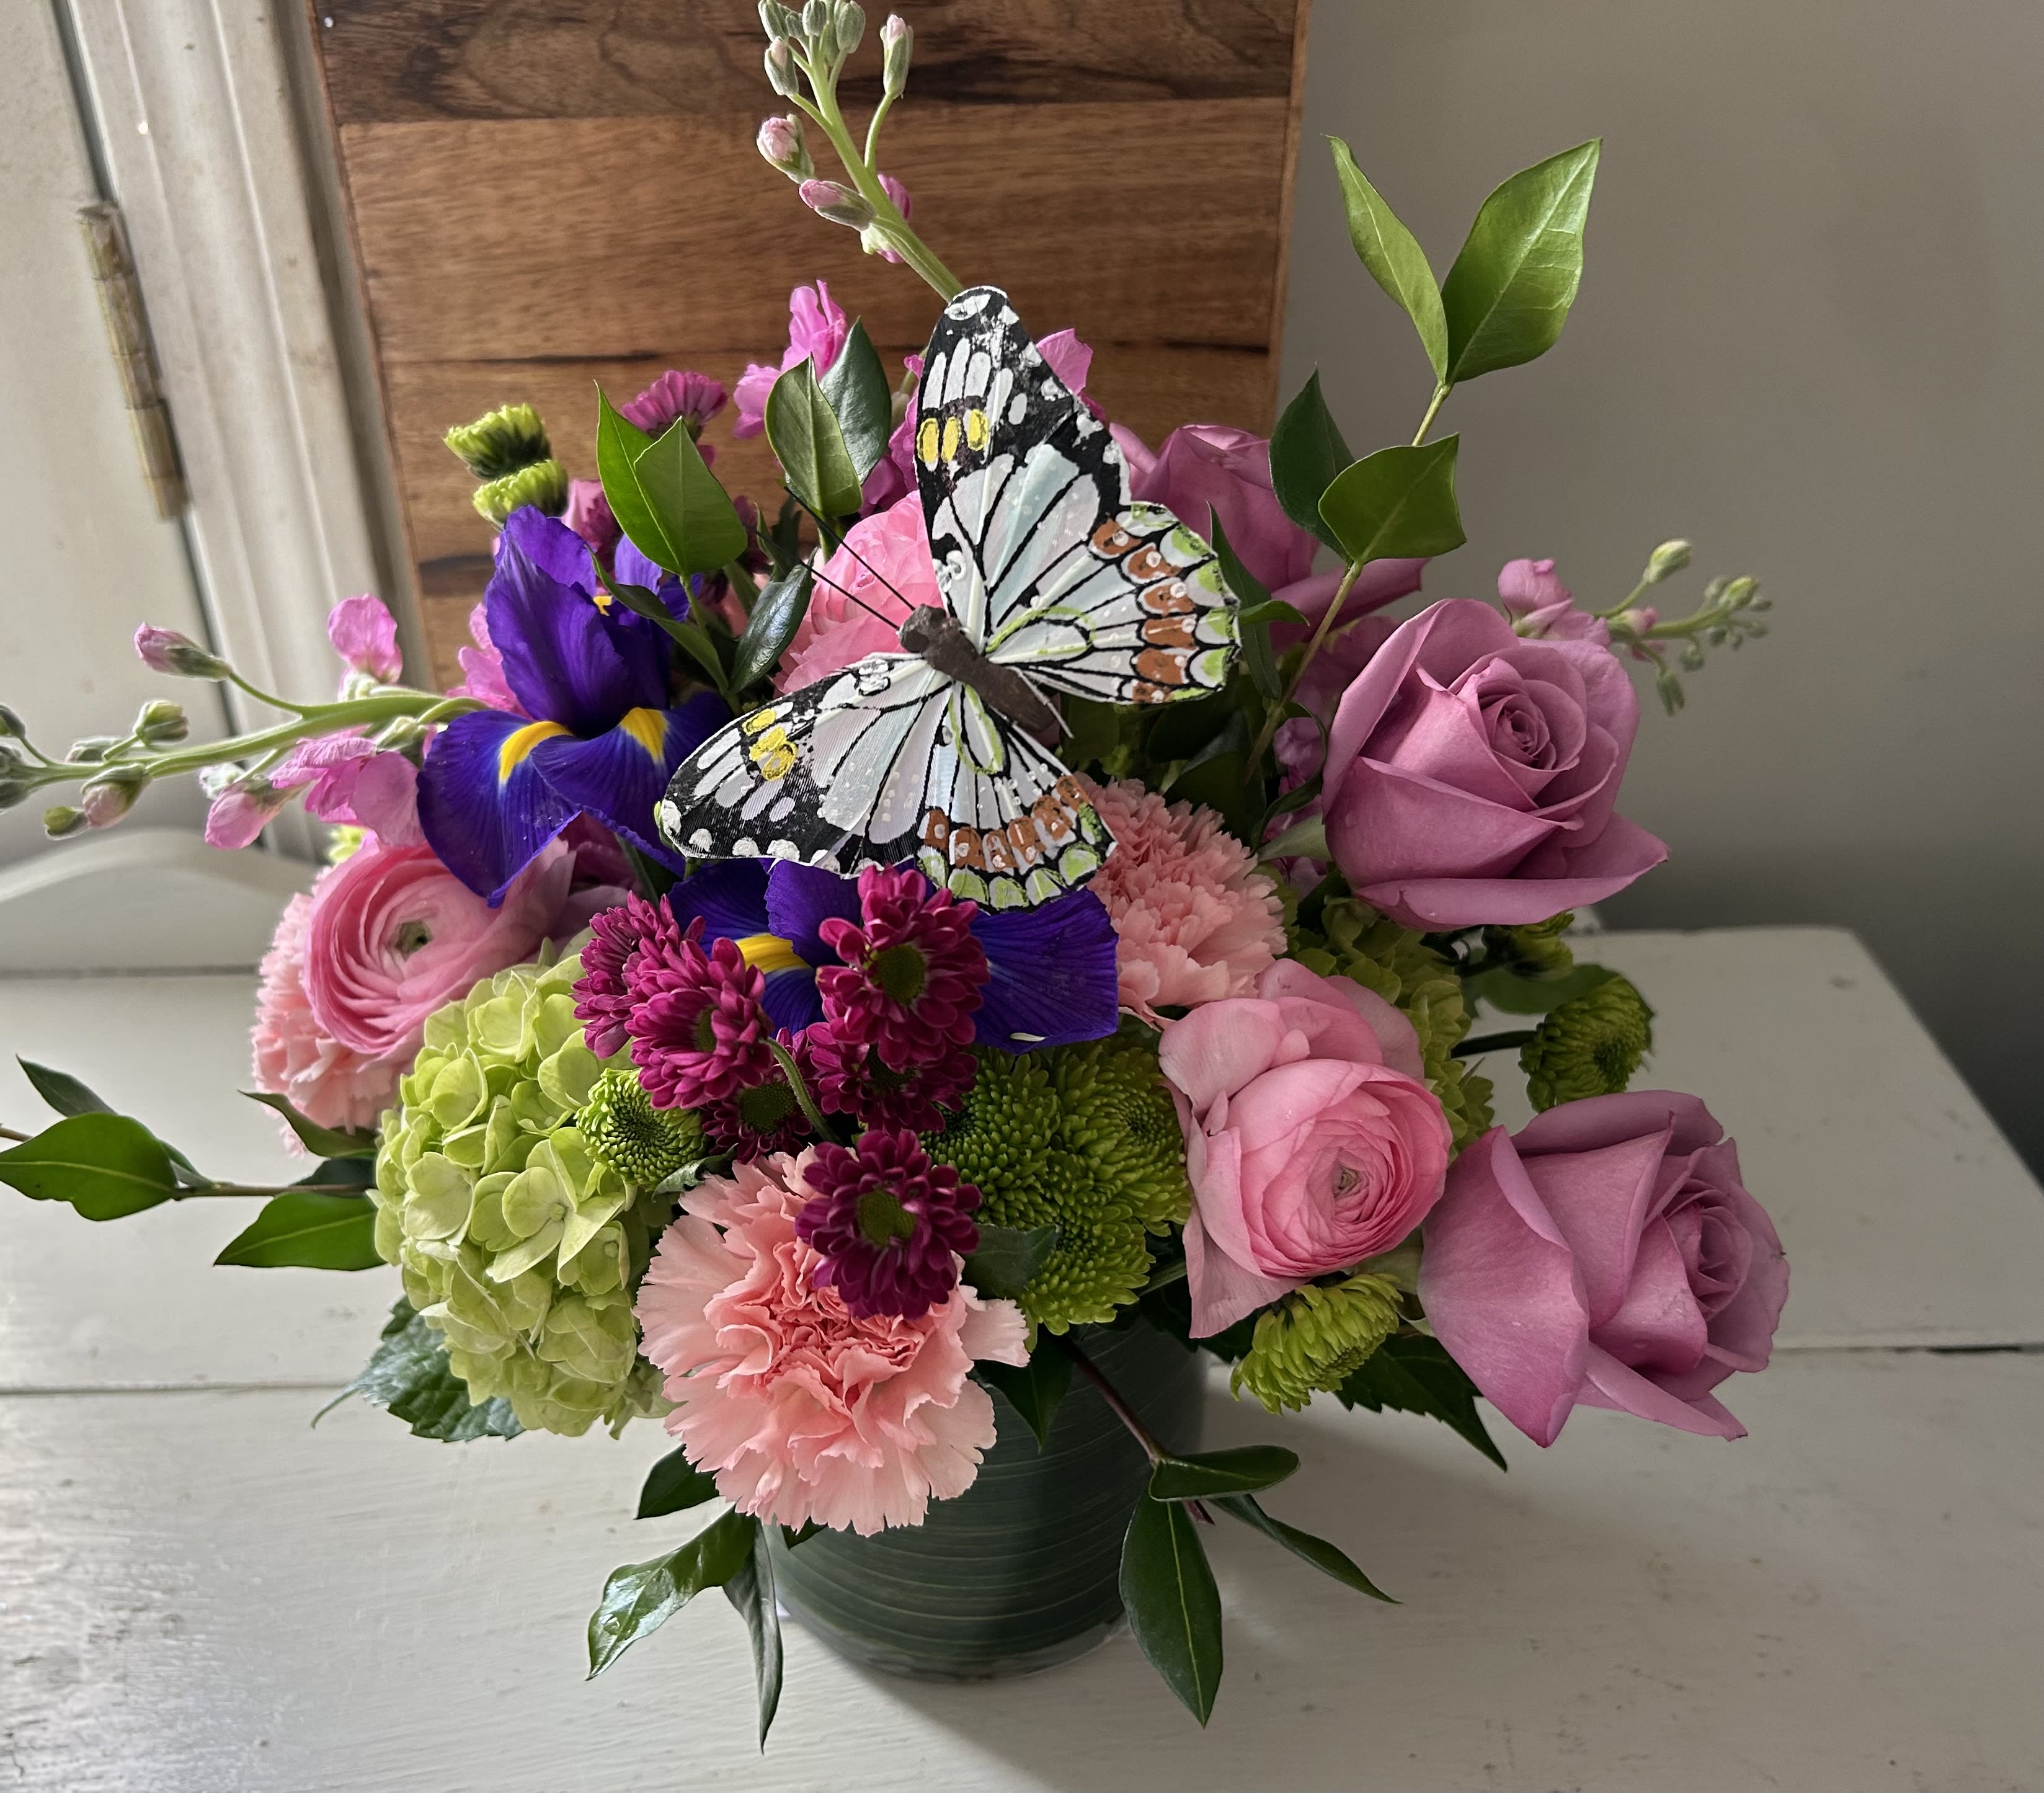 Flora Bella Summer  - A beautiful combination of green hydrangea, pink ranunculus, lavender roses, stock, purple irises, micro poms and carnations in a clear cylinder.